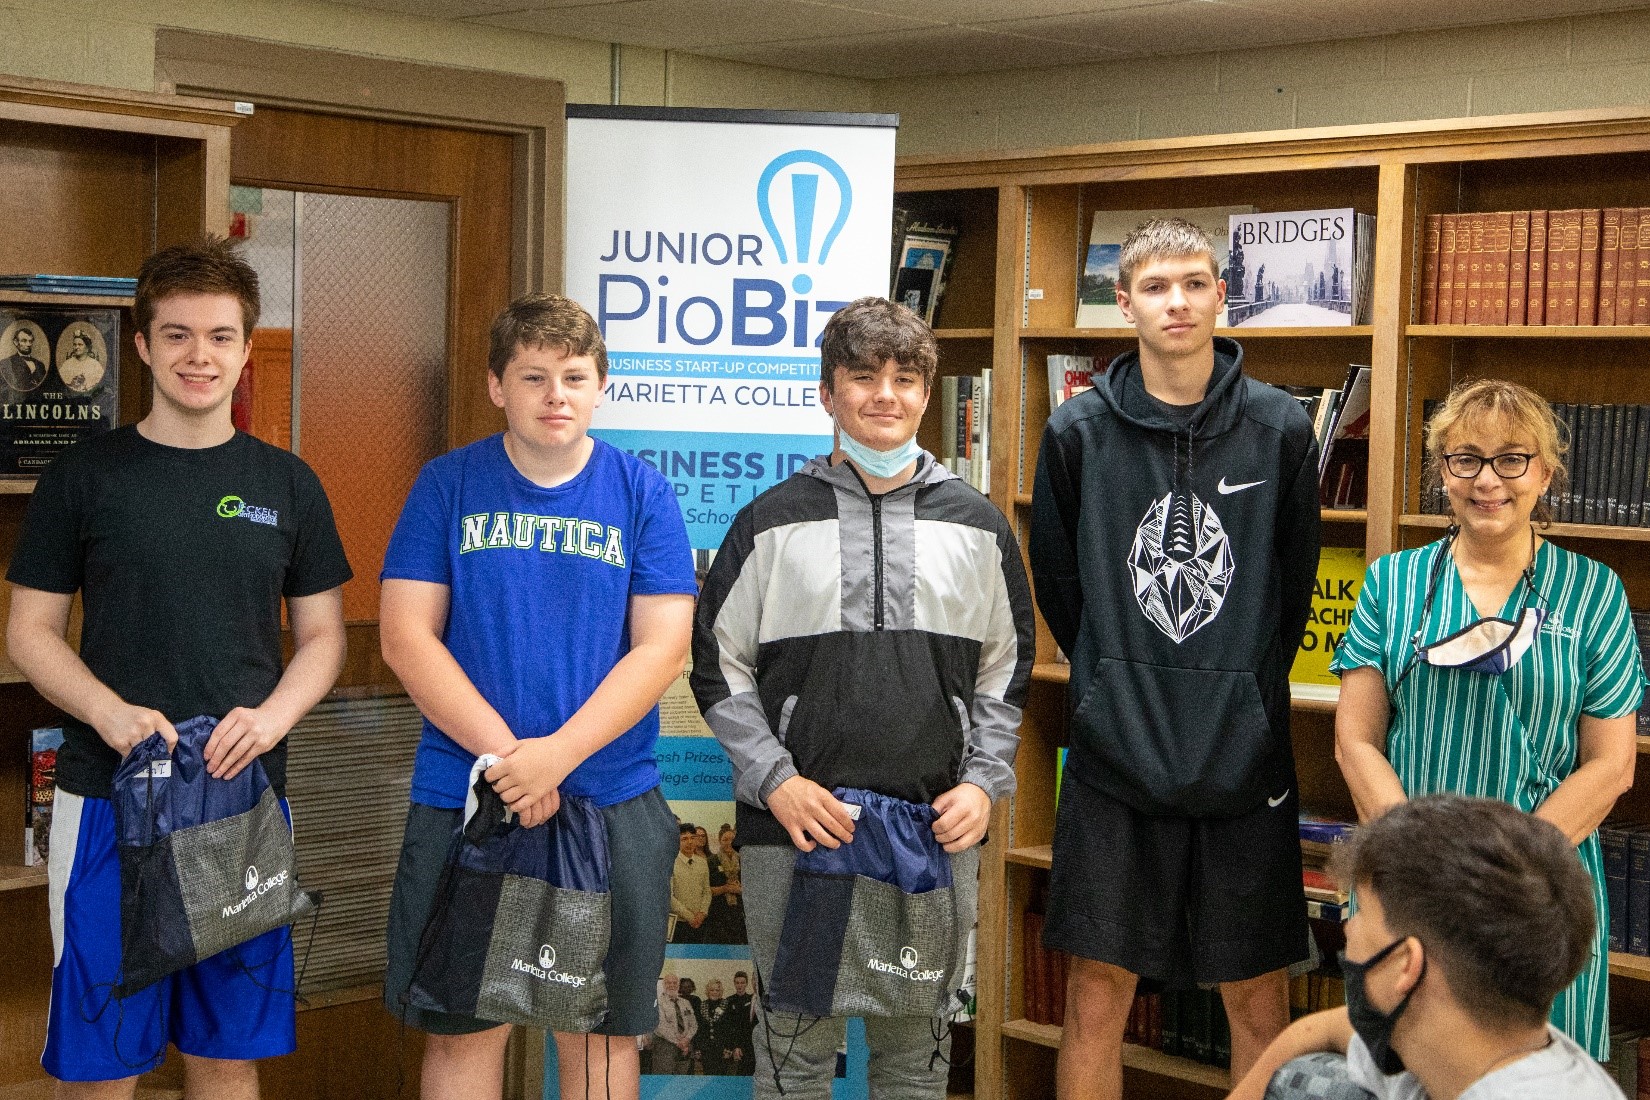 Dr. Khorassani visited Belpre High School to present the fourth-place award to Nicholas Lambert, Anthony Sampson, Matthew Rasmussen, and Evan Turrill for their project “Restaurant Rater”